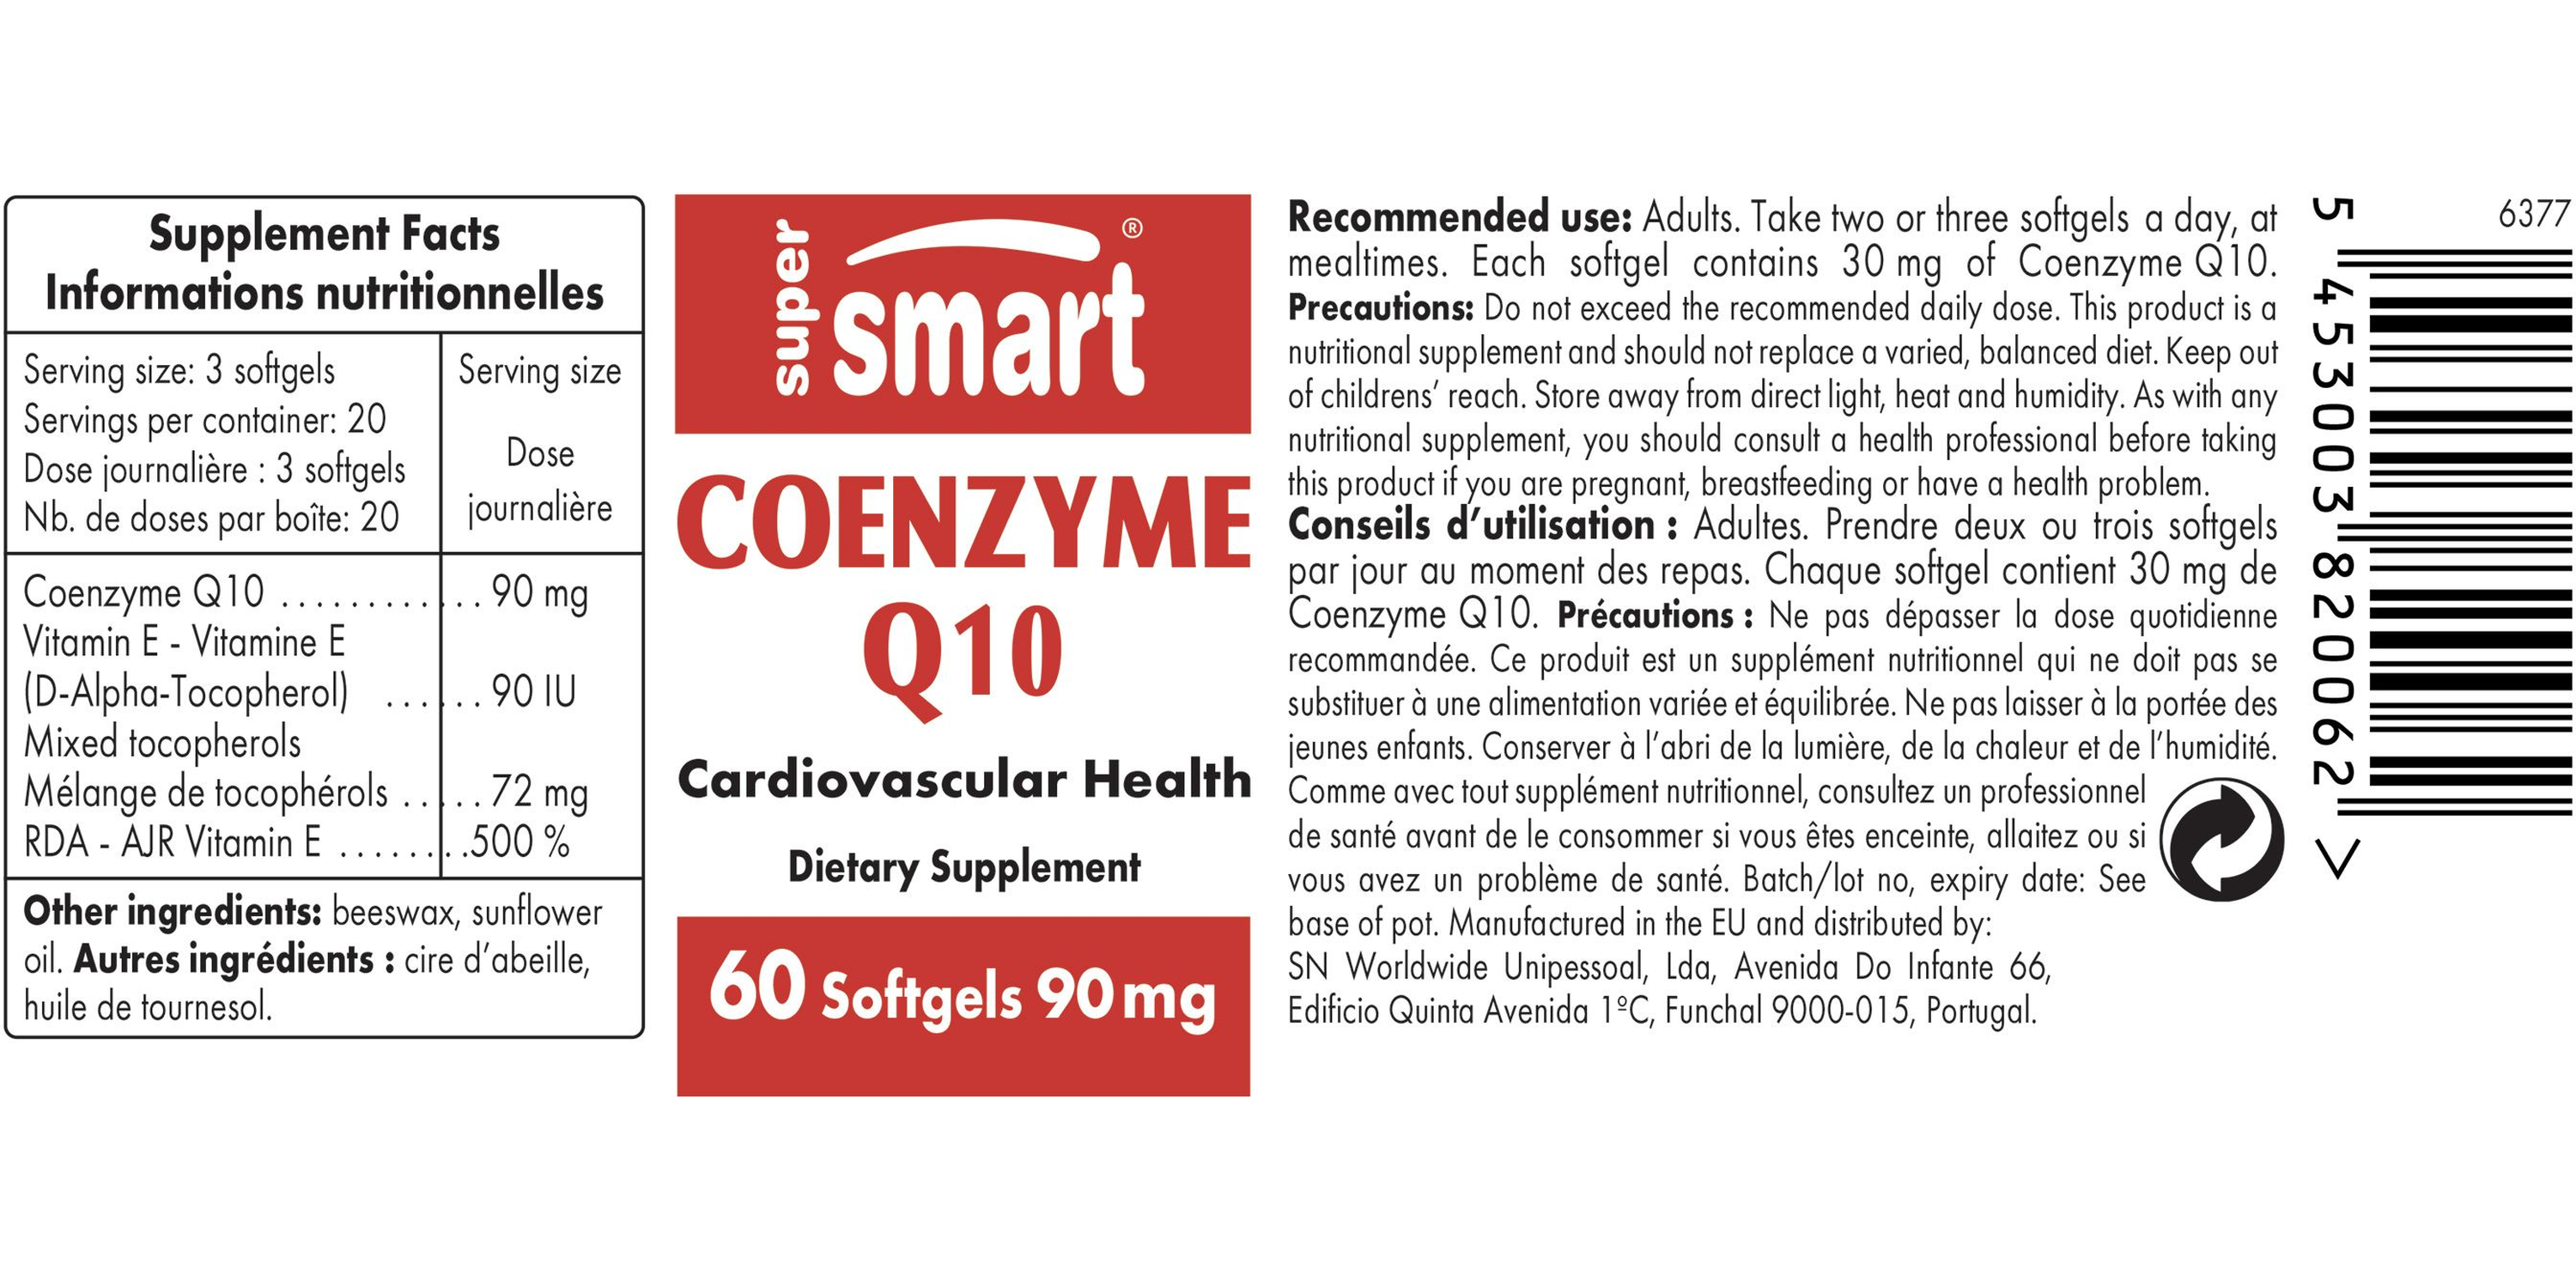 Co-Enzyme Q10